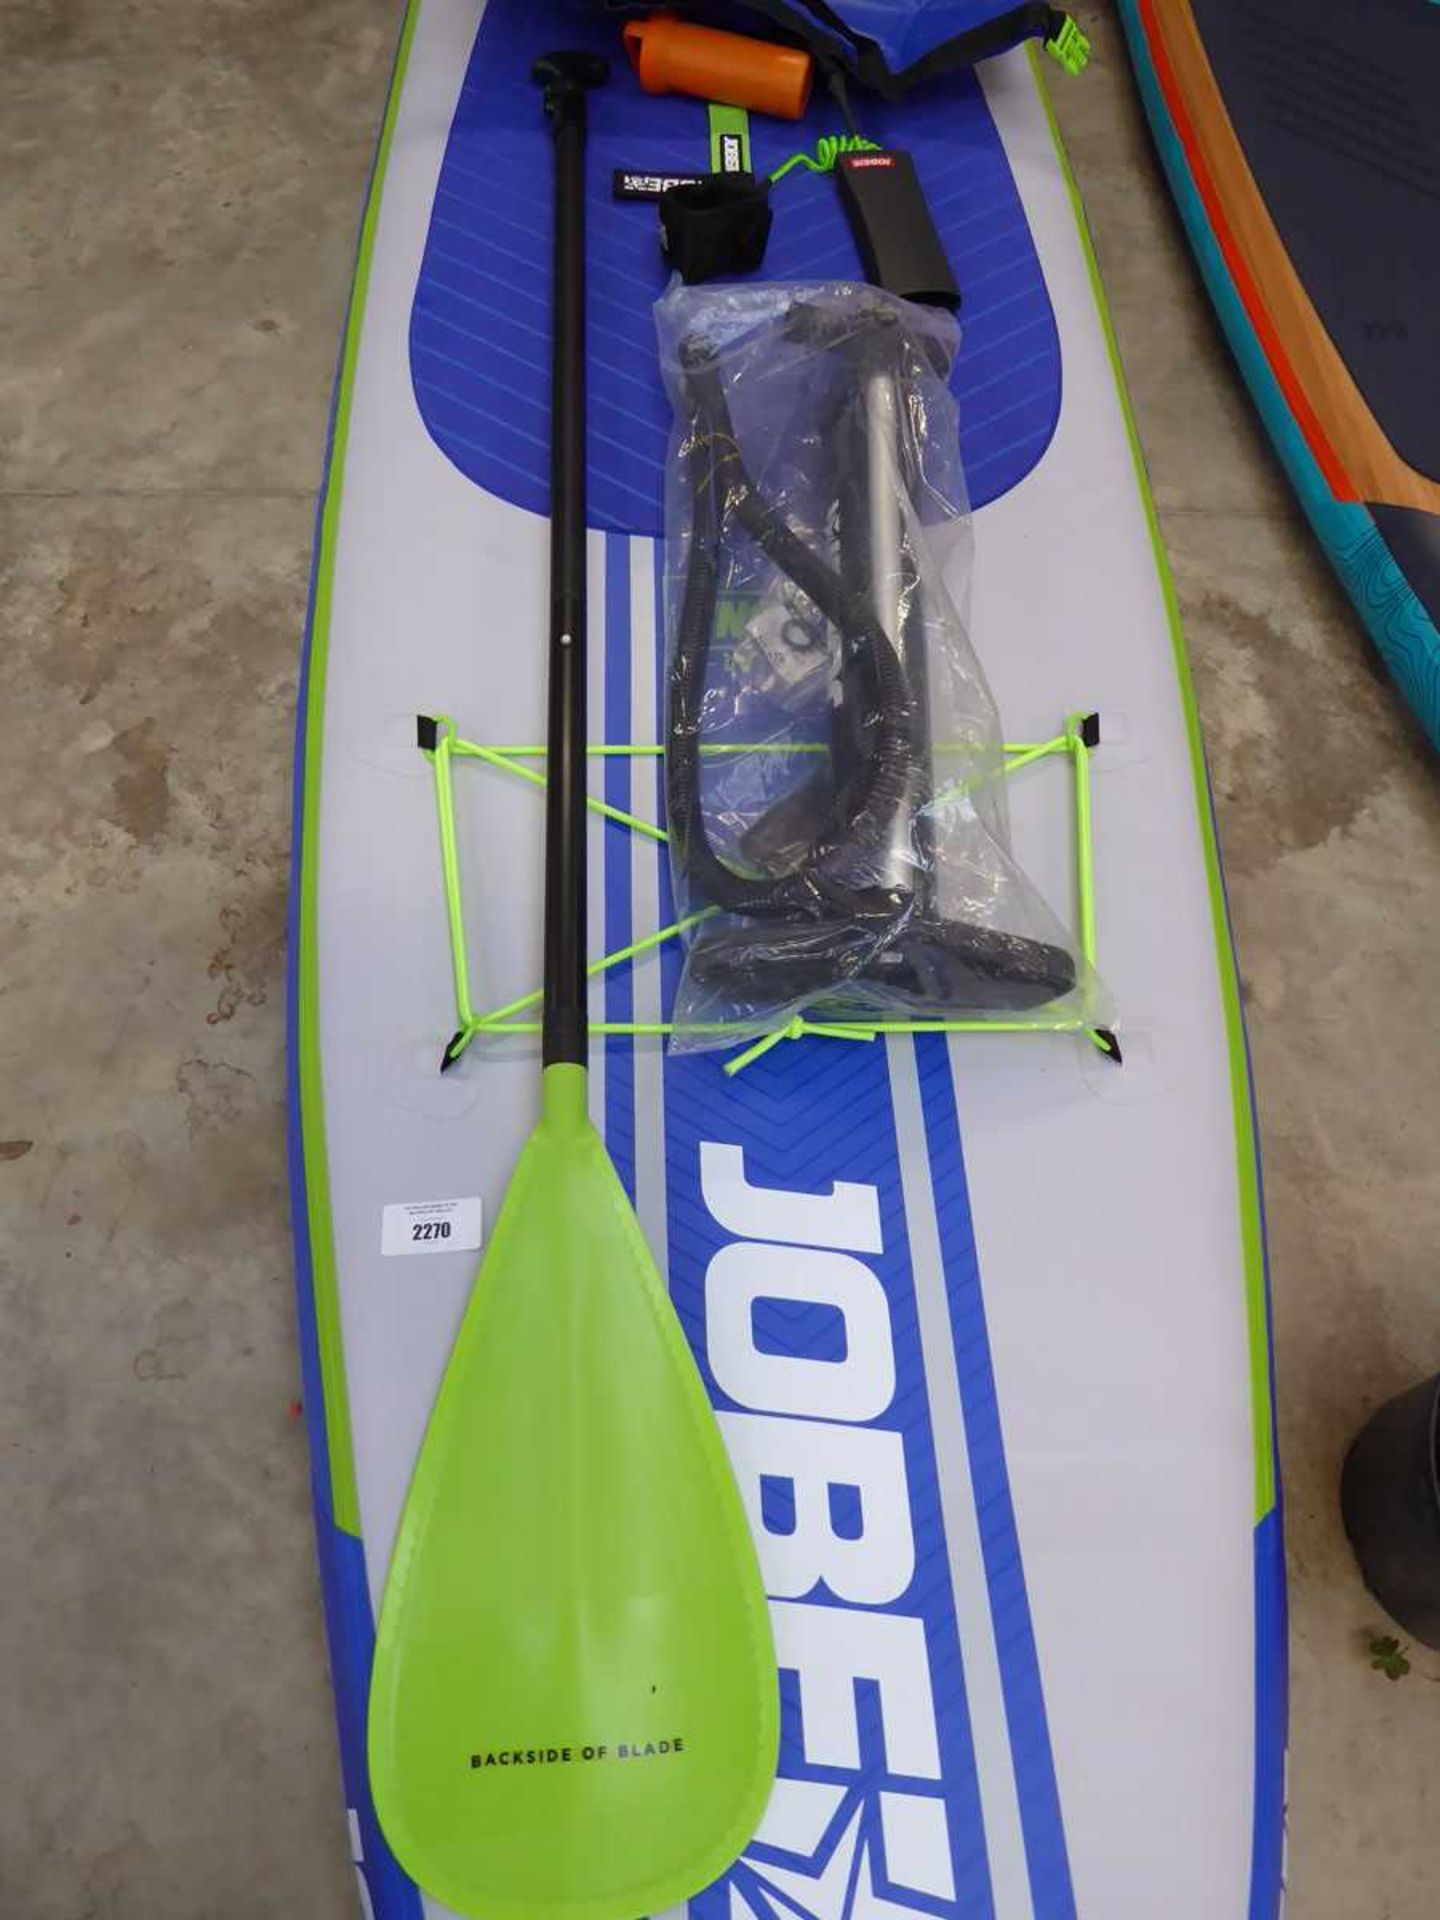 +VAT Jobe Aero inflatable stand up paddle board with bag, pump and oar in box - Image 2 of 4